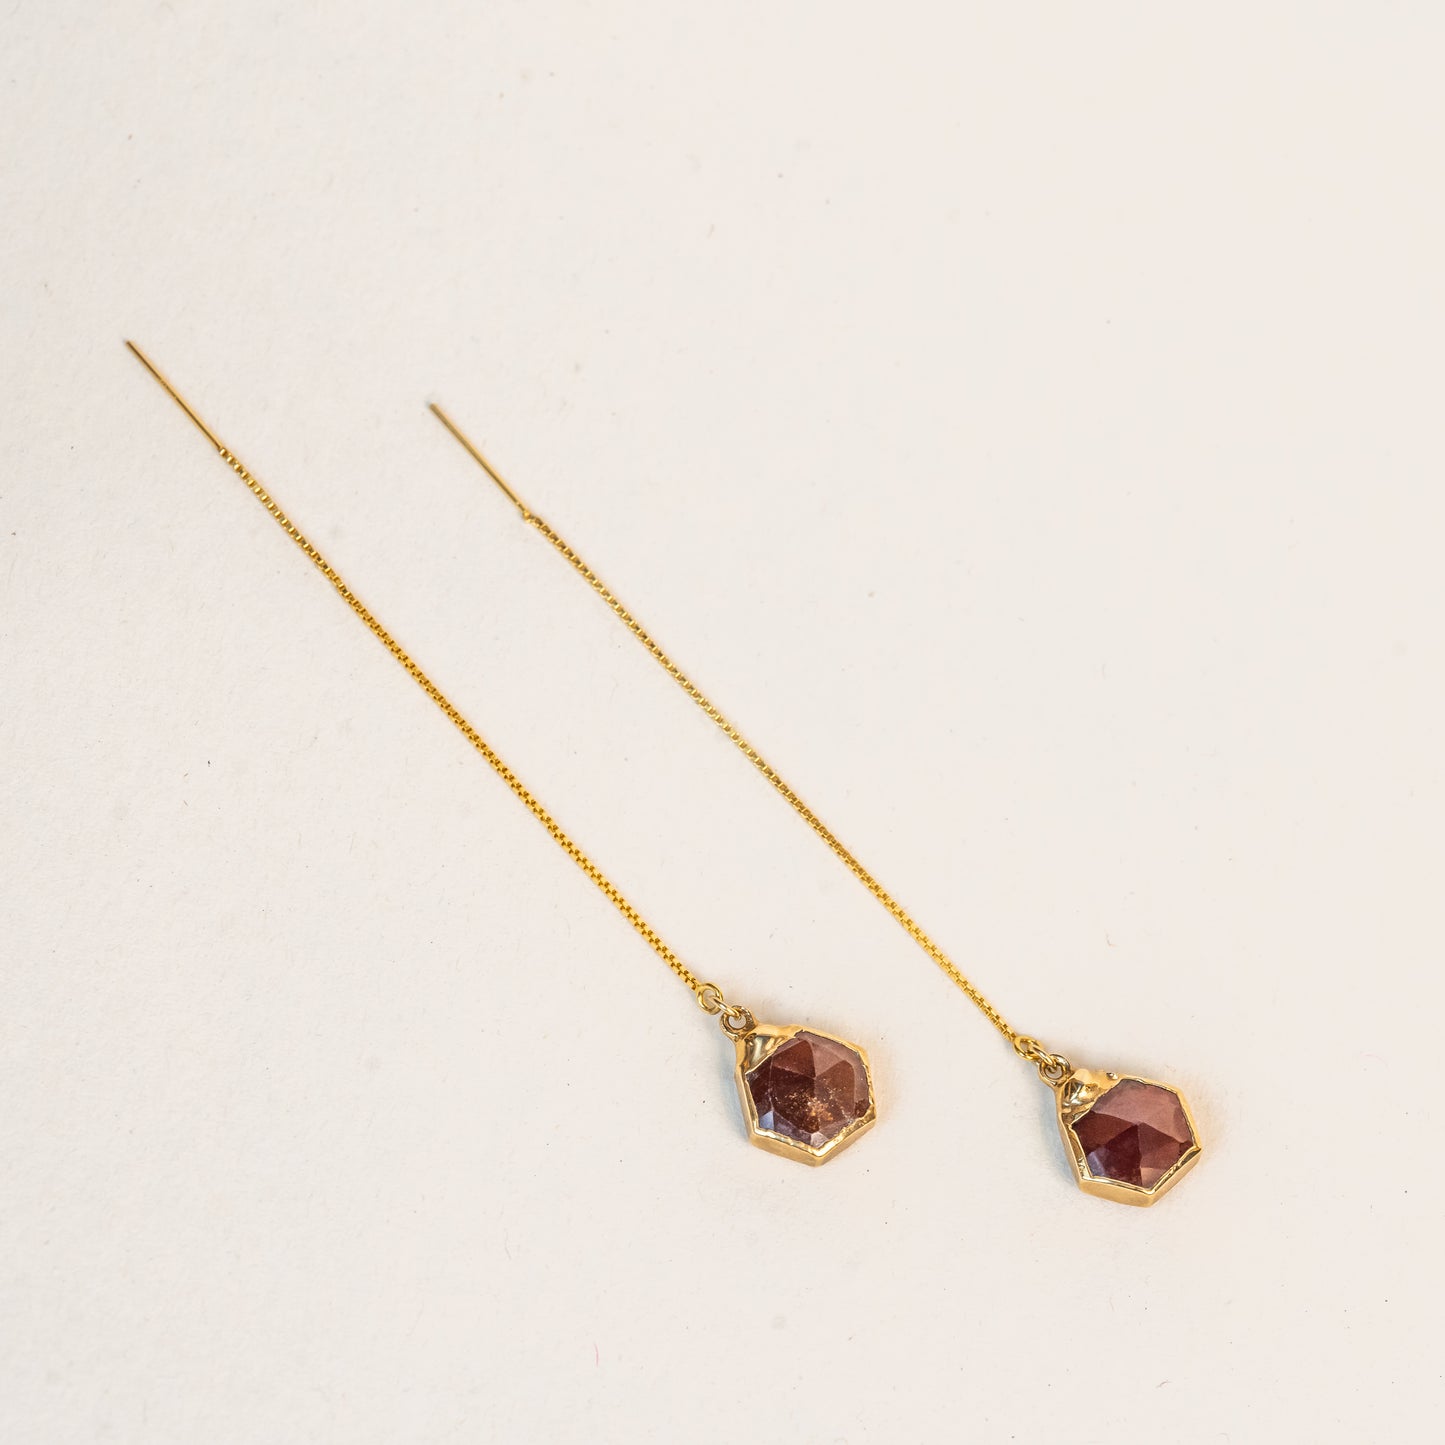 Earrings - Ear Threaders Gold Filled Ear Wires with Gemstones